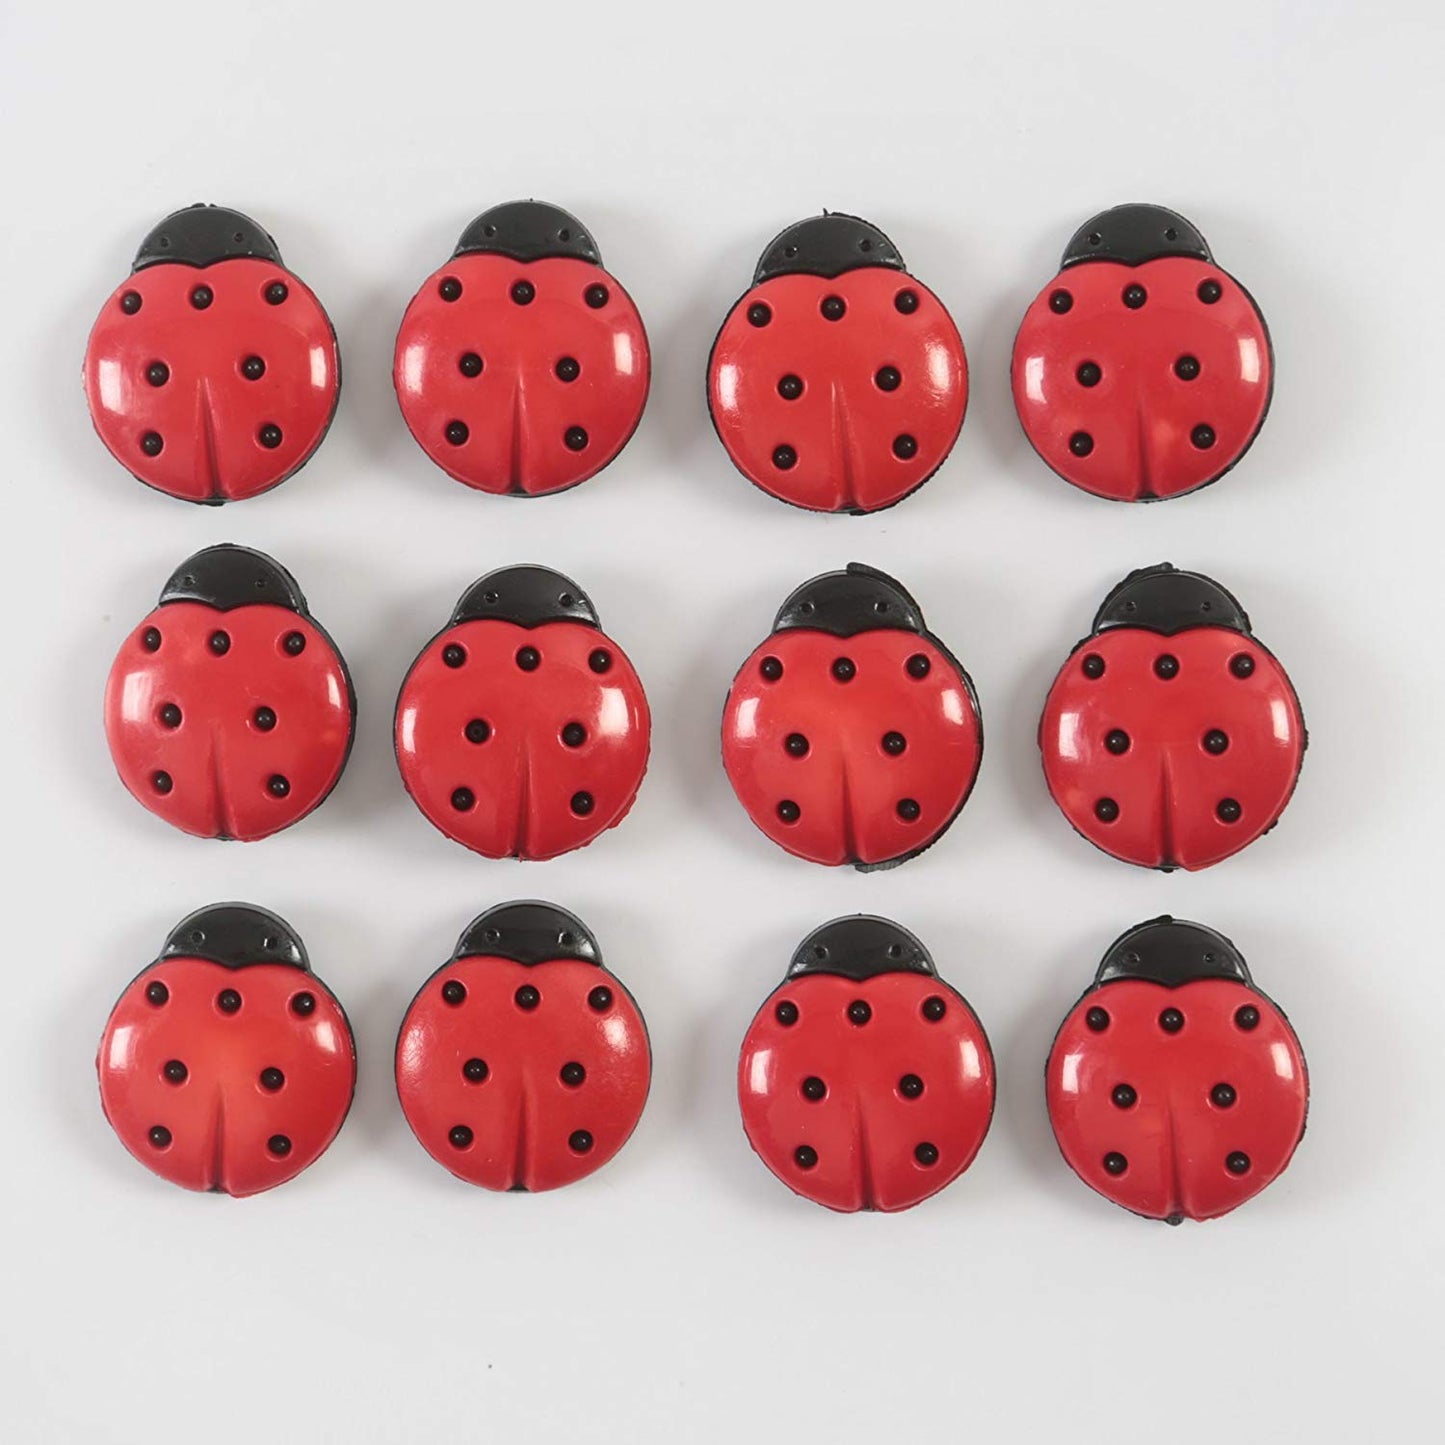 Ladybug Buttons Favorite Findings by Blumenthal Lansing